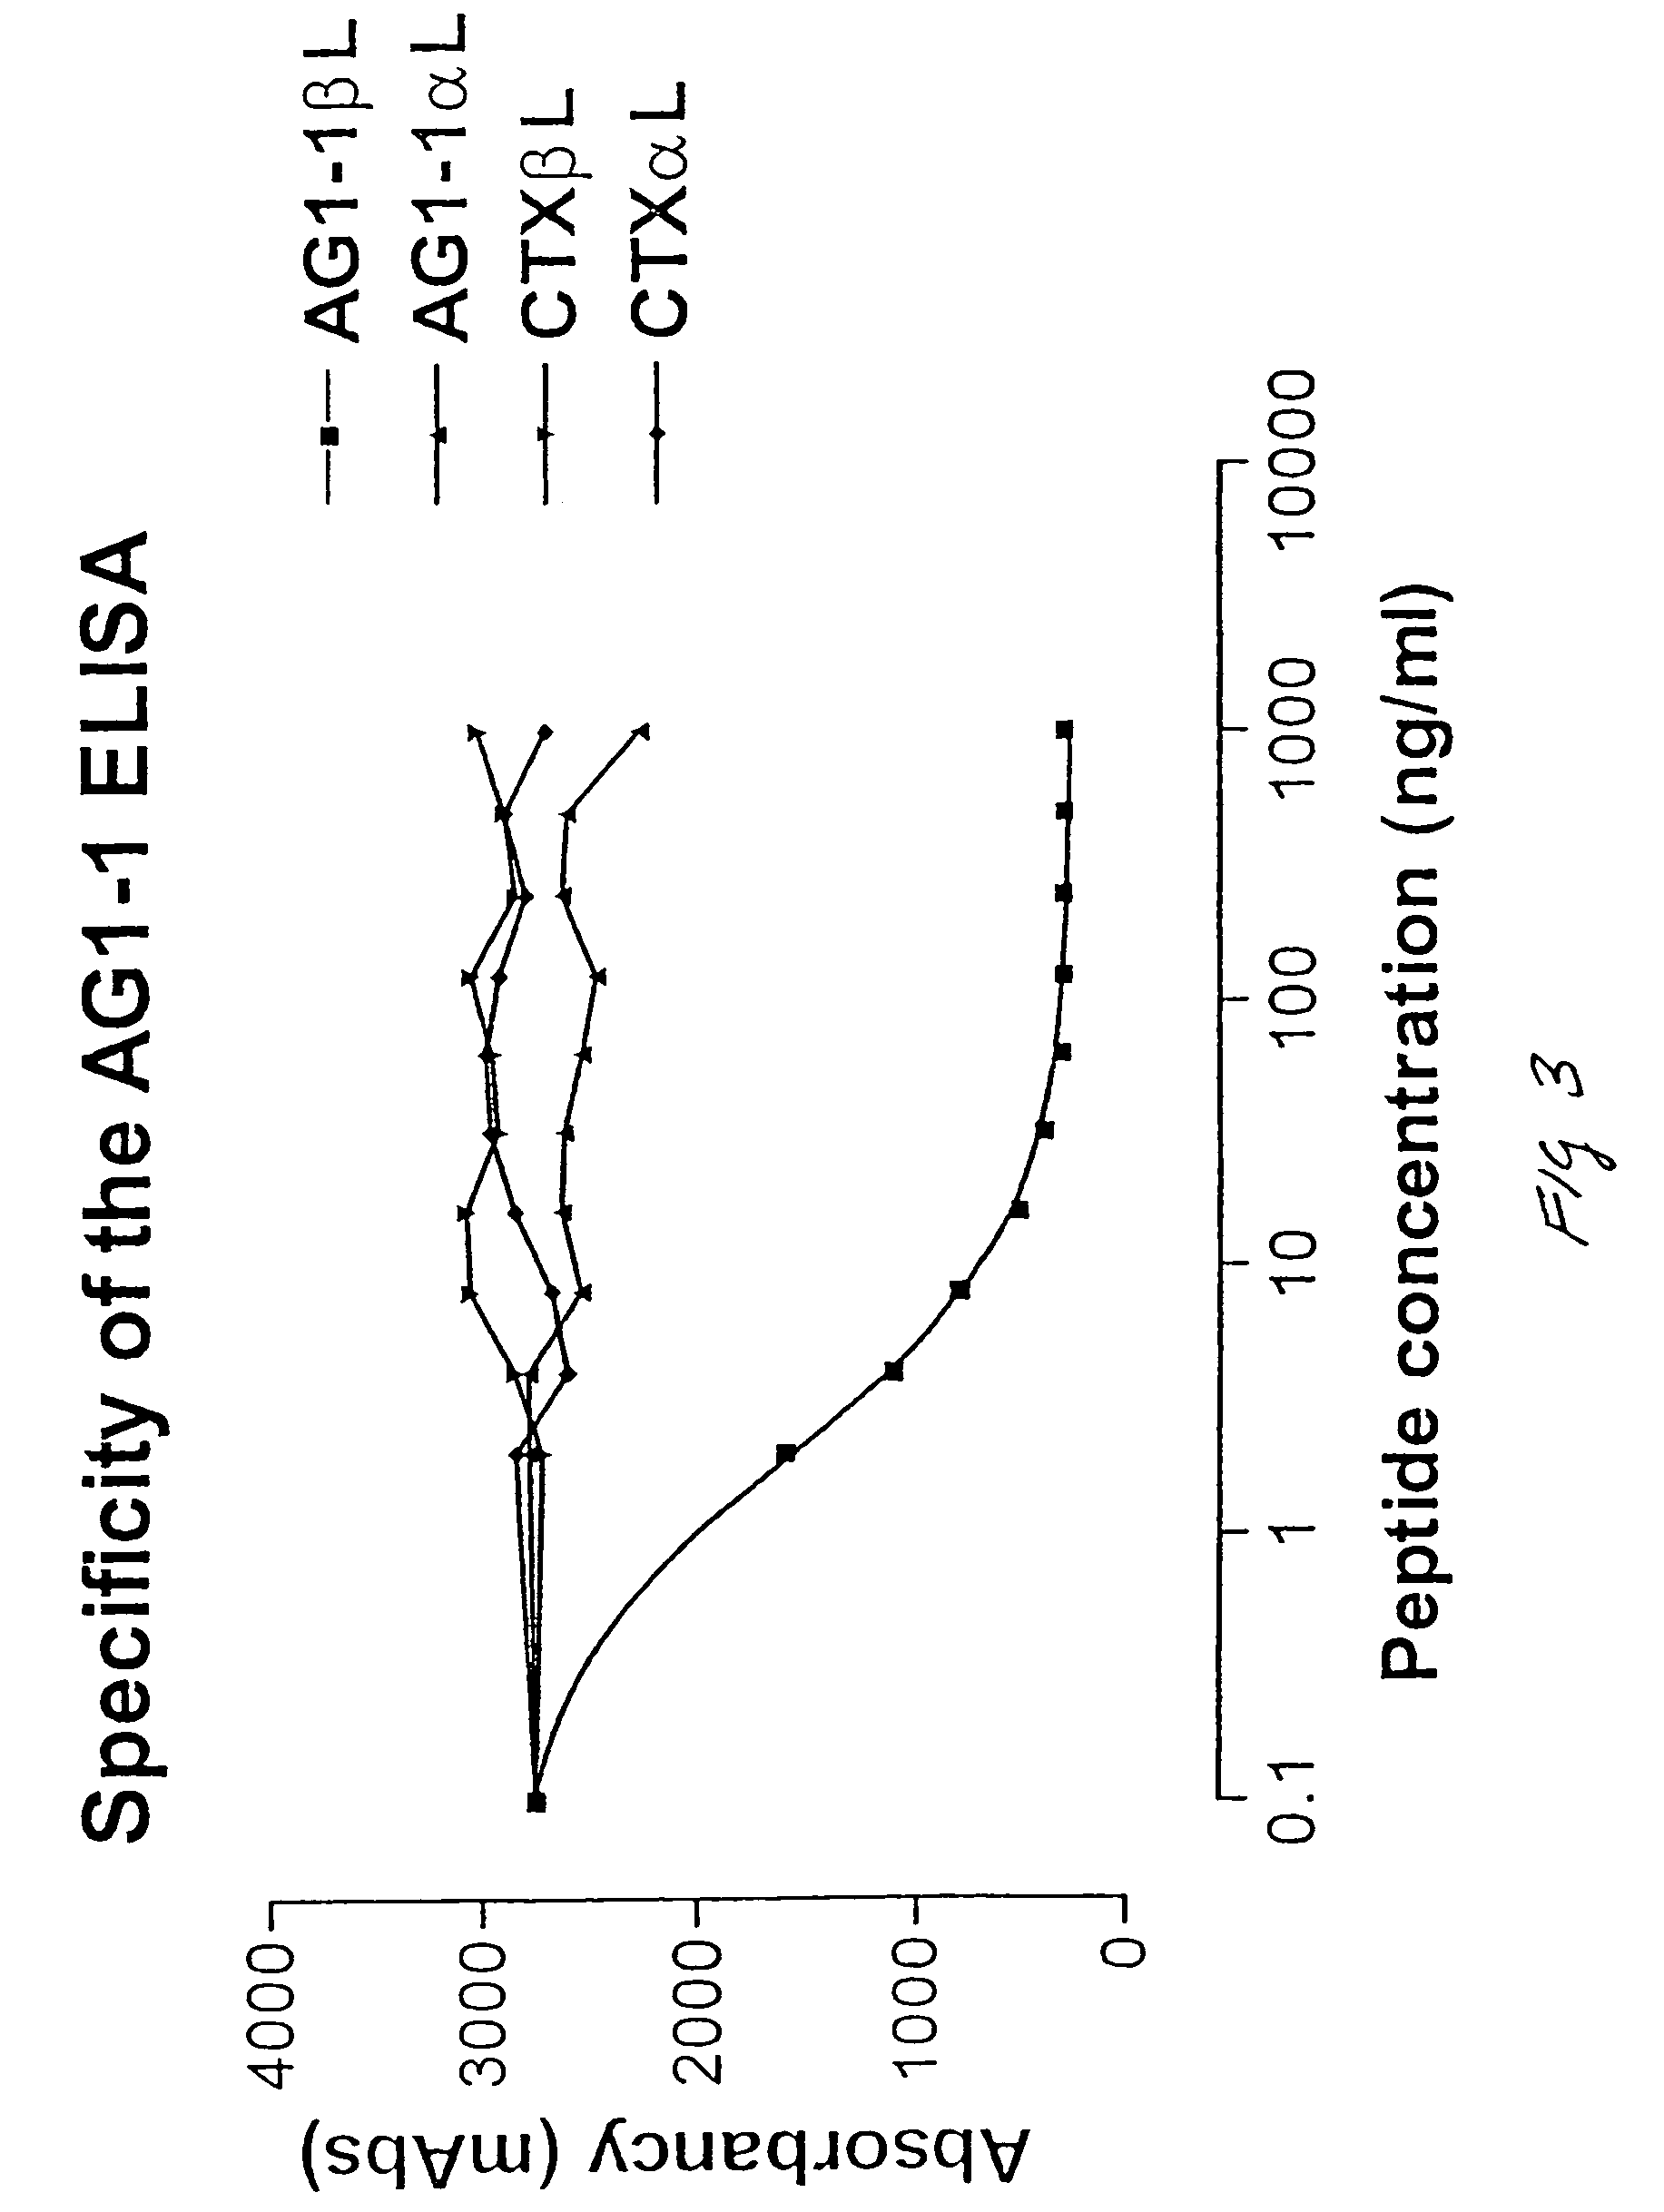 Assay of isomerised and/or optically inverted proteins and protein fragments